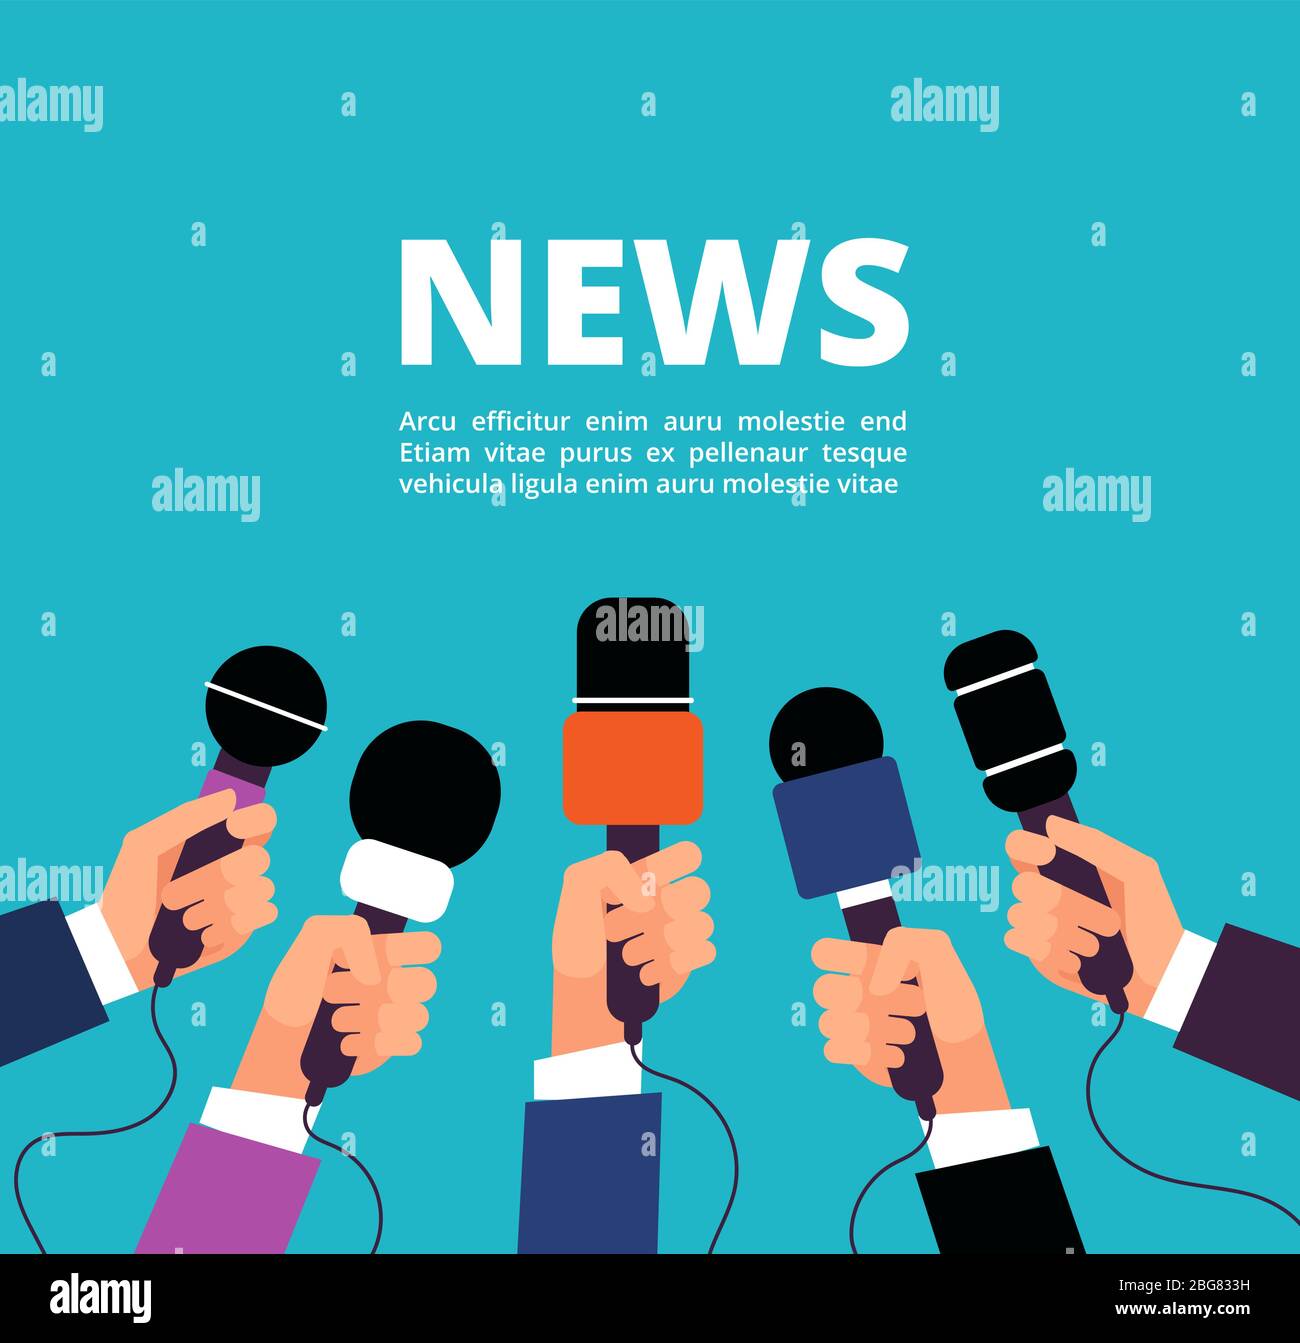 News concept with microphones. Broadcasting, interview and communication vector banner with handa holding microphones. Illustration of microphone for news, broadcasting live news Stock Vector